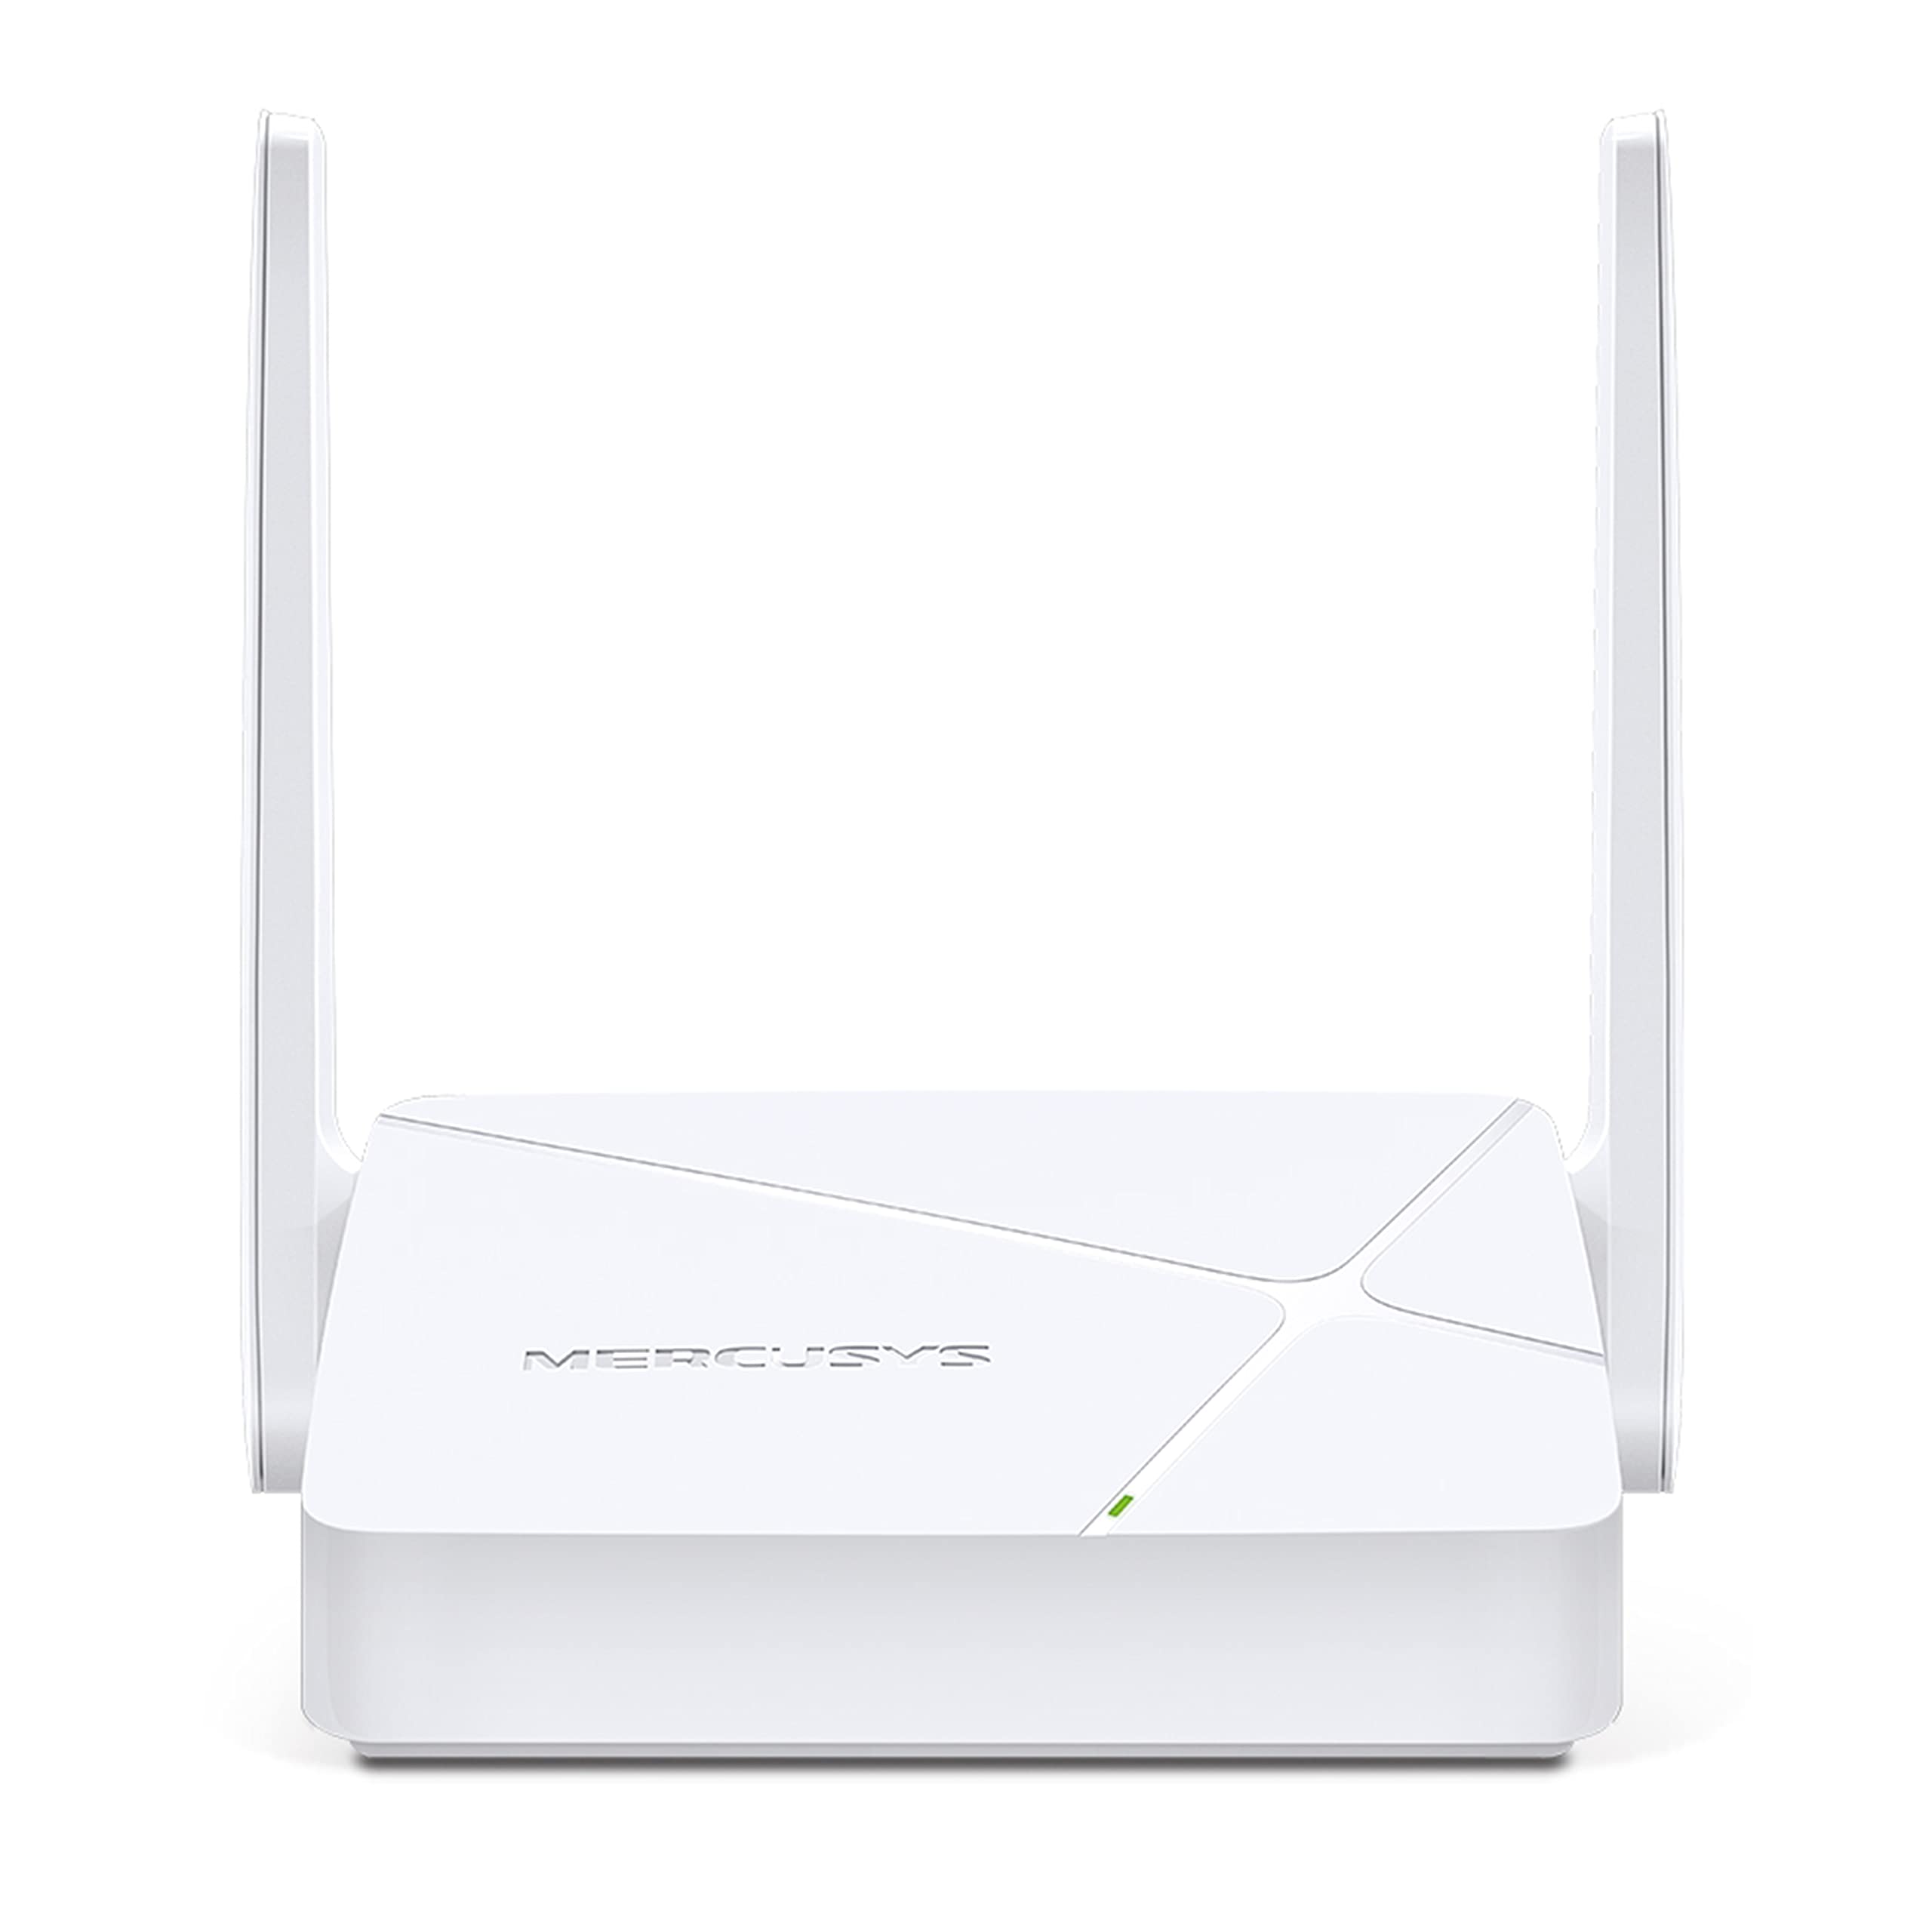 AC750 DUAL-BAND WI-FI ROUTER